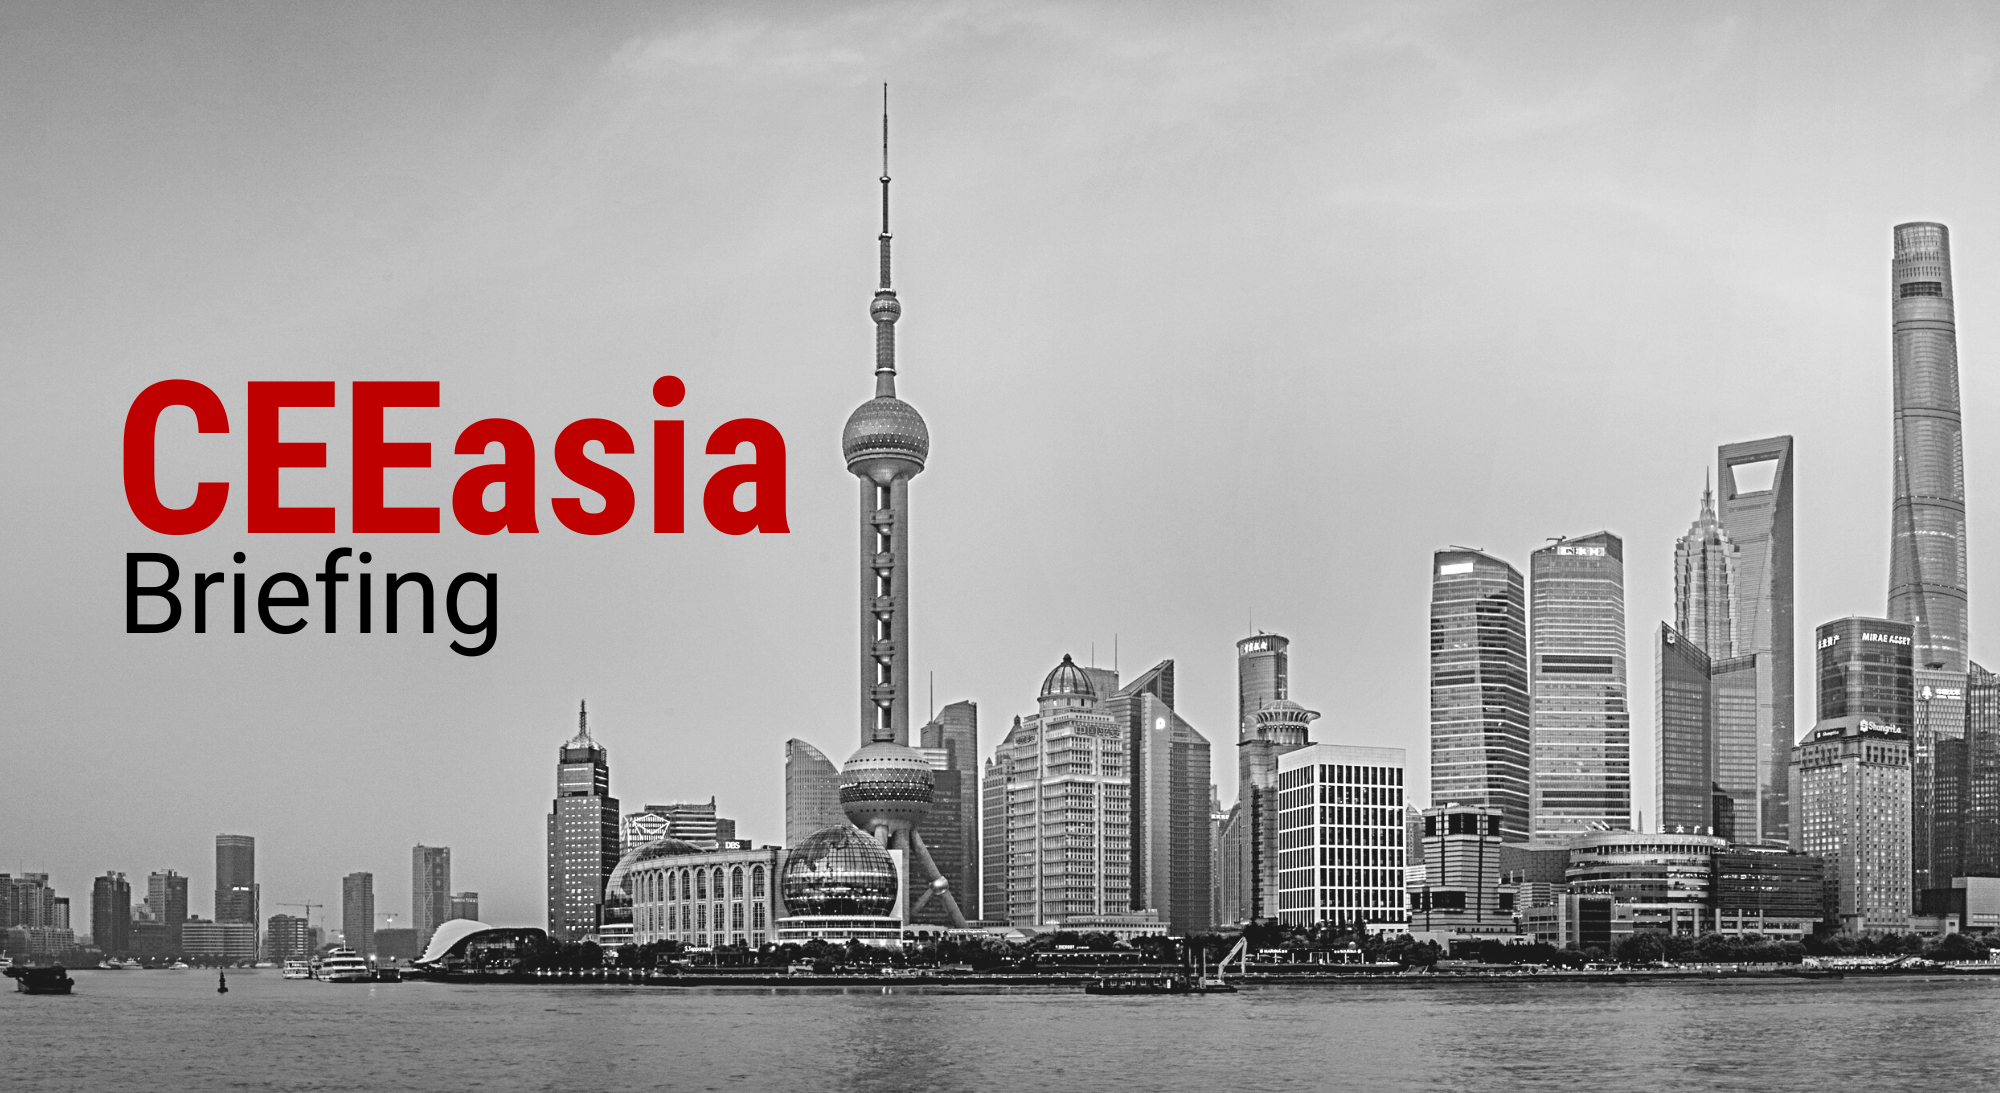 CEEasia Briefing #7: Chinese ‘sticks’ & ‘carrots’ diplomacy in V4, CEE reactions to Hong Kong security law, Malaysia’s WTO lawsuit against EU over palm oil, India-EU summit amid heightened tensions with China